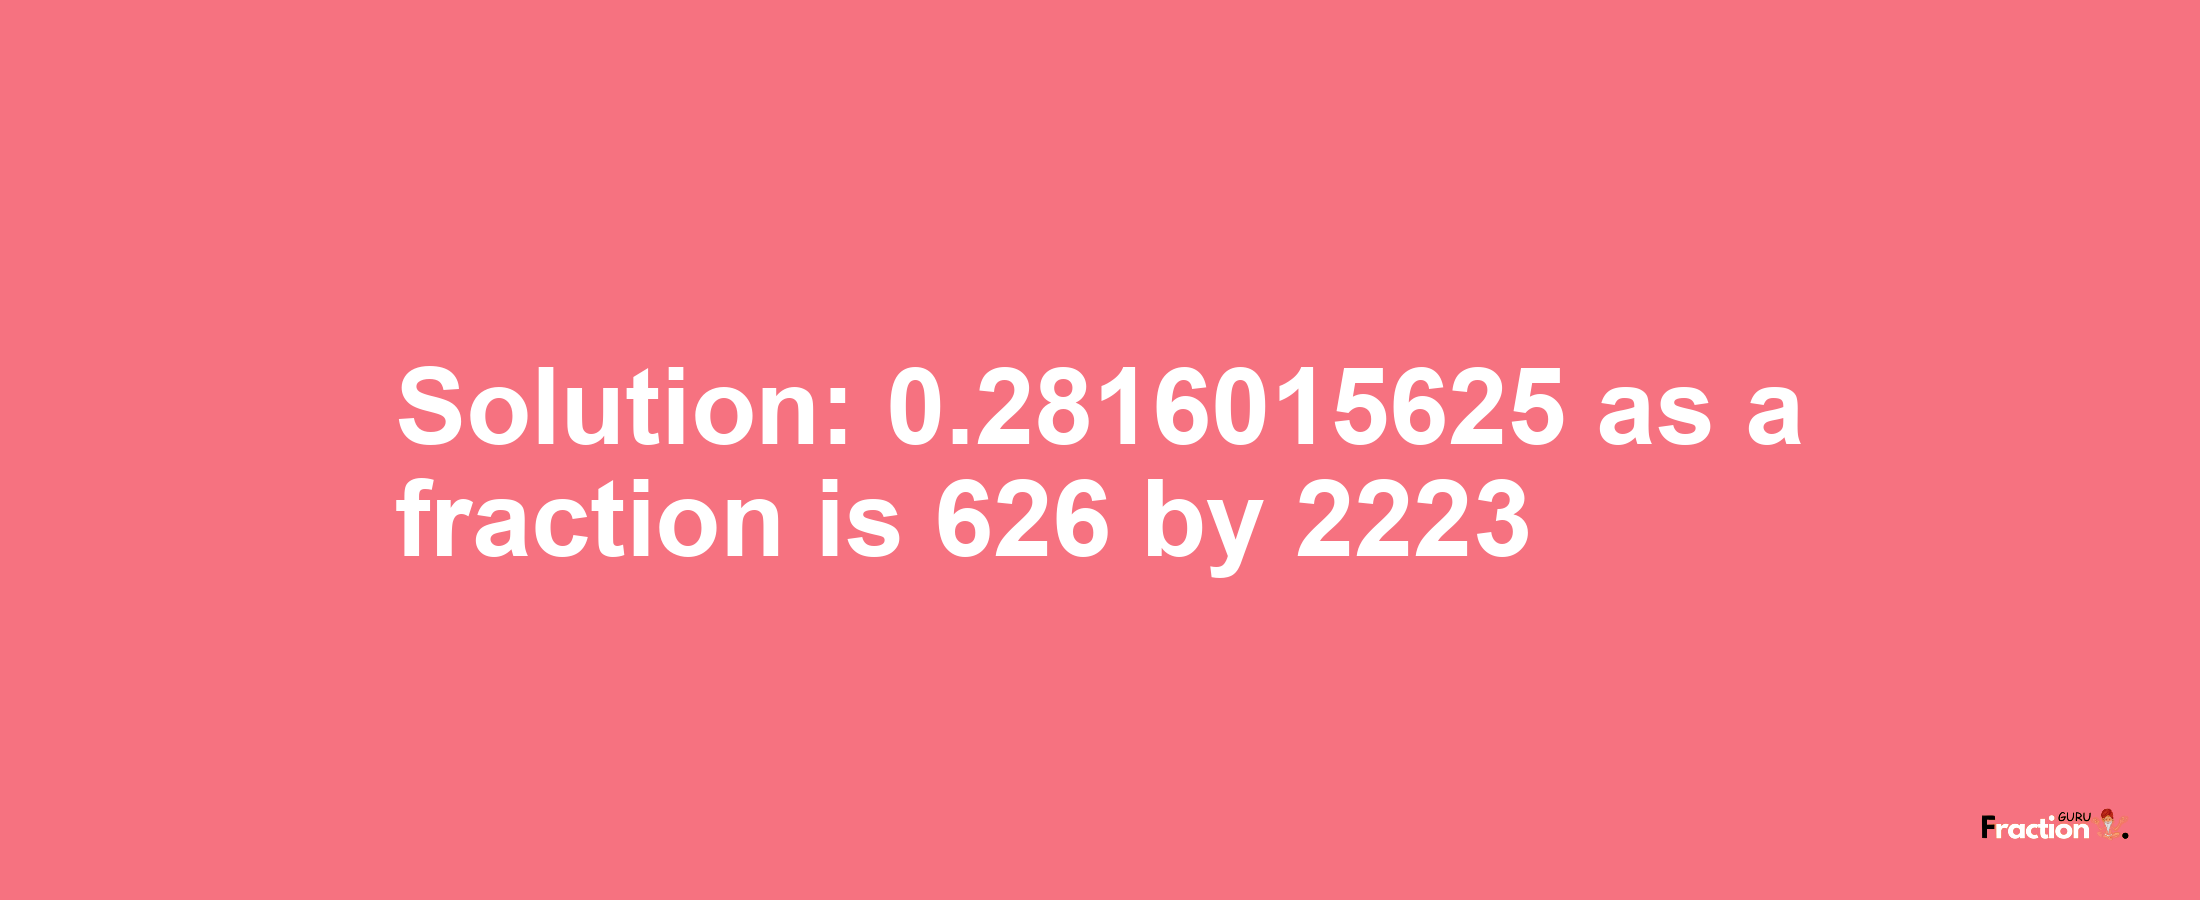 Solution:0.2816015625 as a fraction is 626/2223